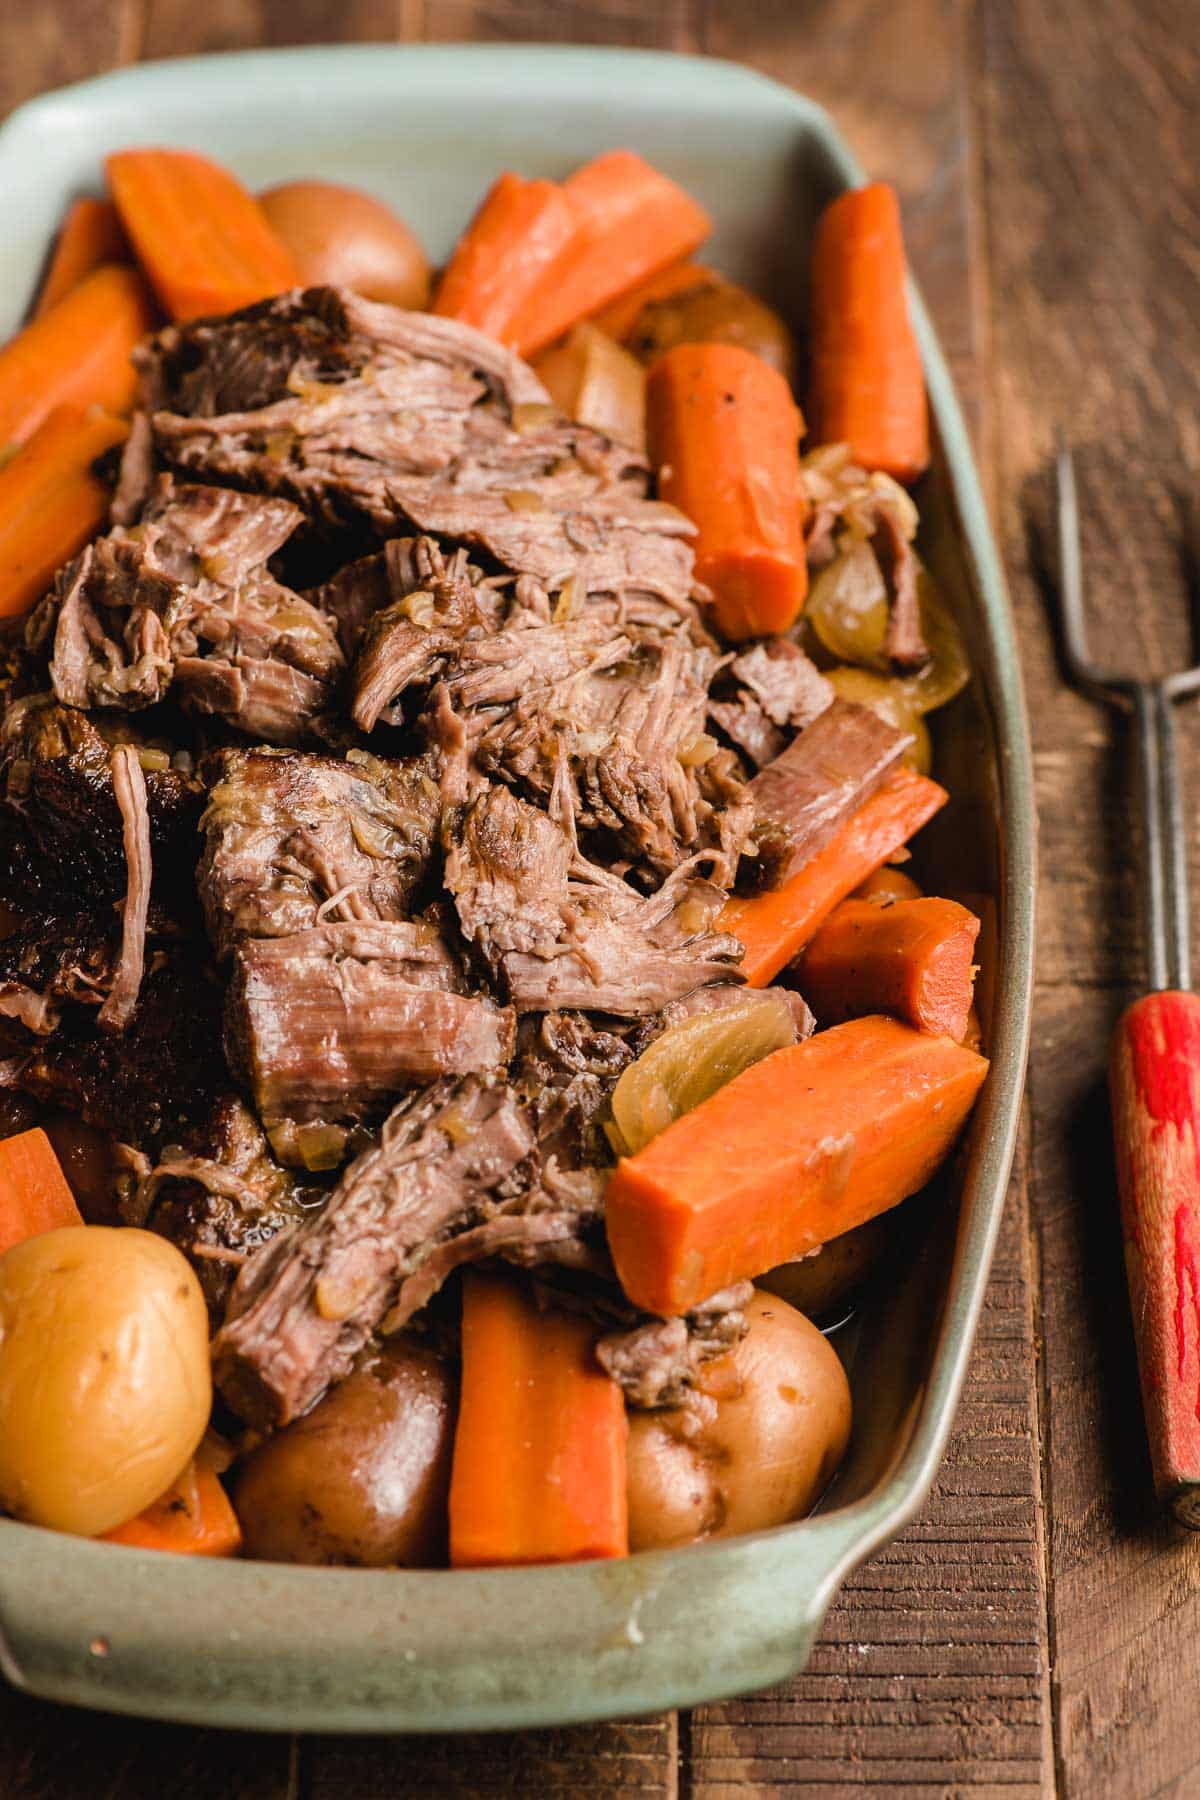 Tender pieces of pot roast piled on carrots and potatoes on a rectangular platter.